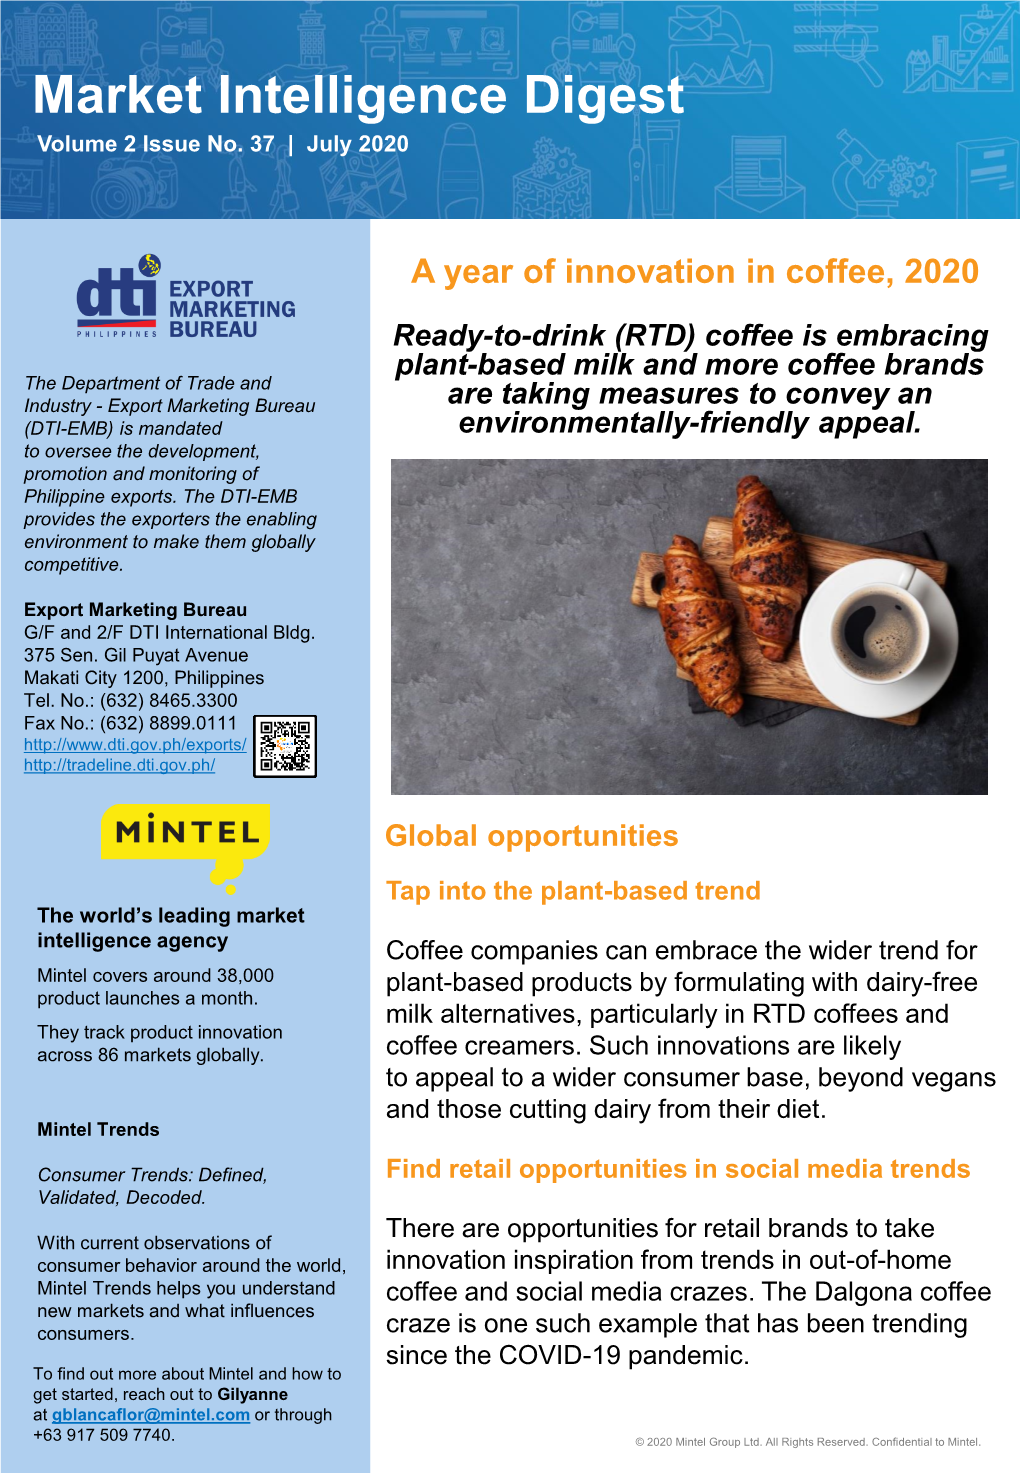 Year of Innovation in Coffee, 2020